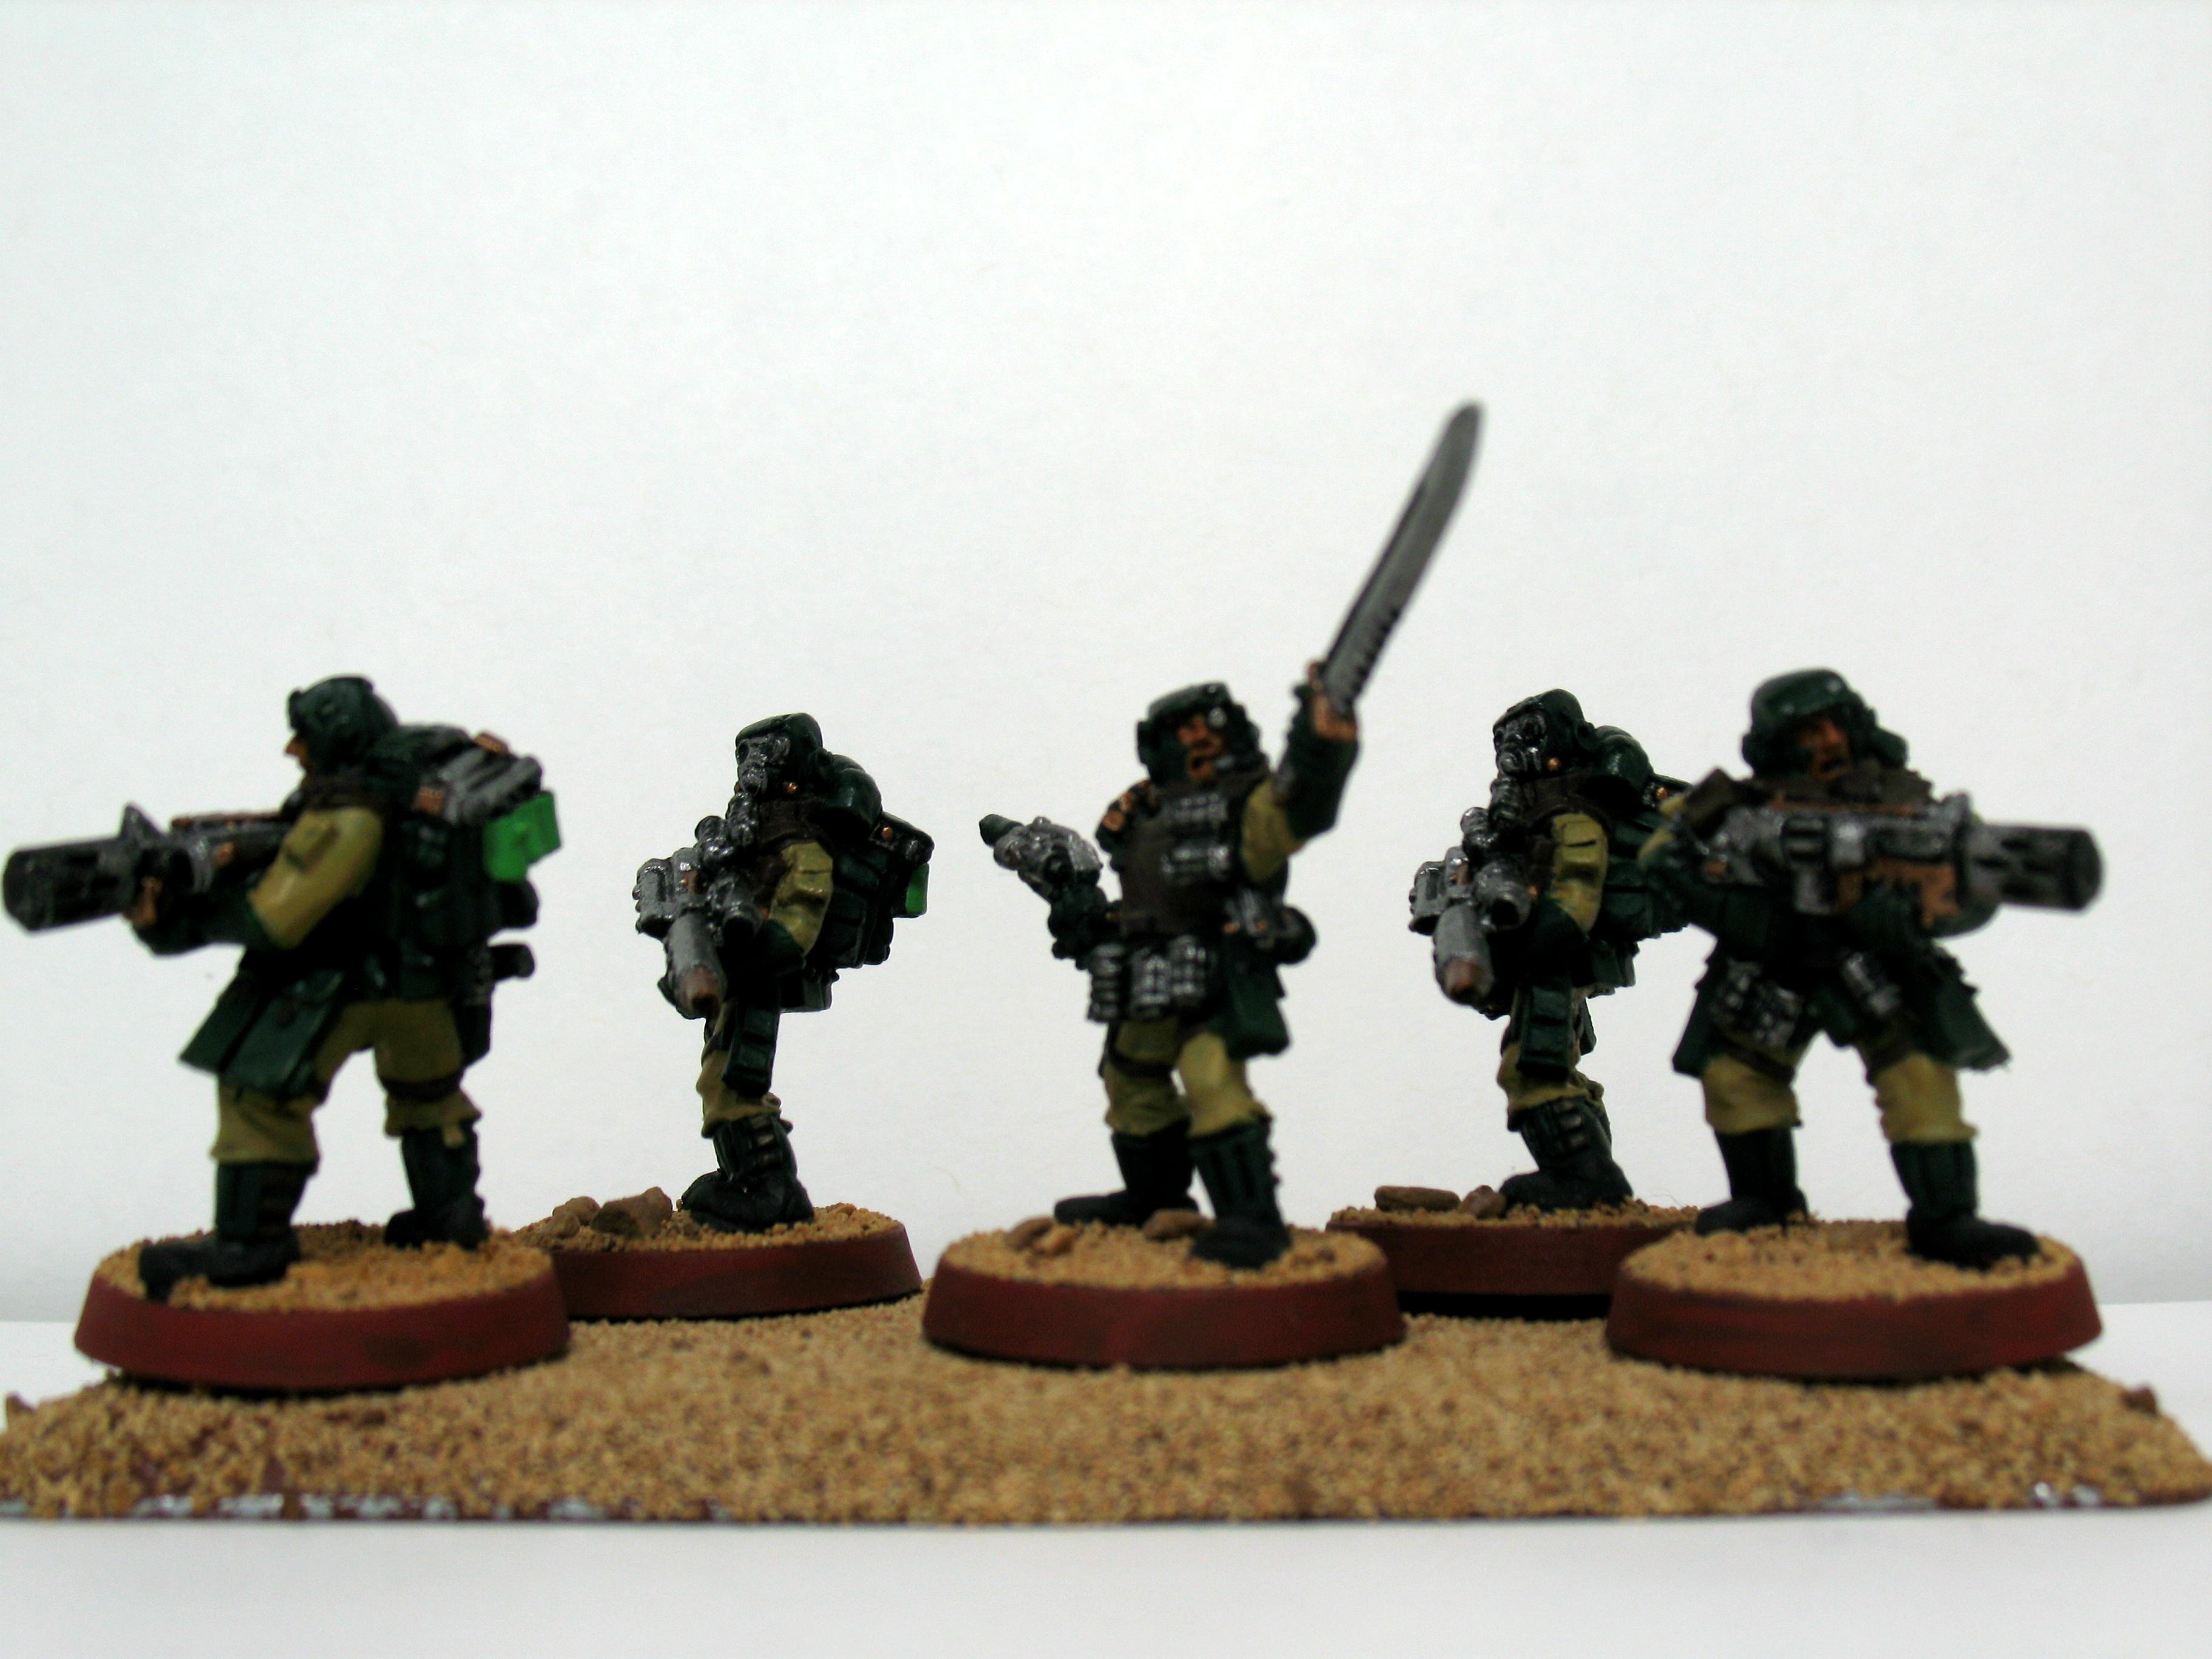 11th, Assault, Cadian Assault, Cadians, Grunts, Guard, Imperial, Imperial Guard, Infantry, Storm Troopers, Stormtrooper